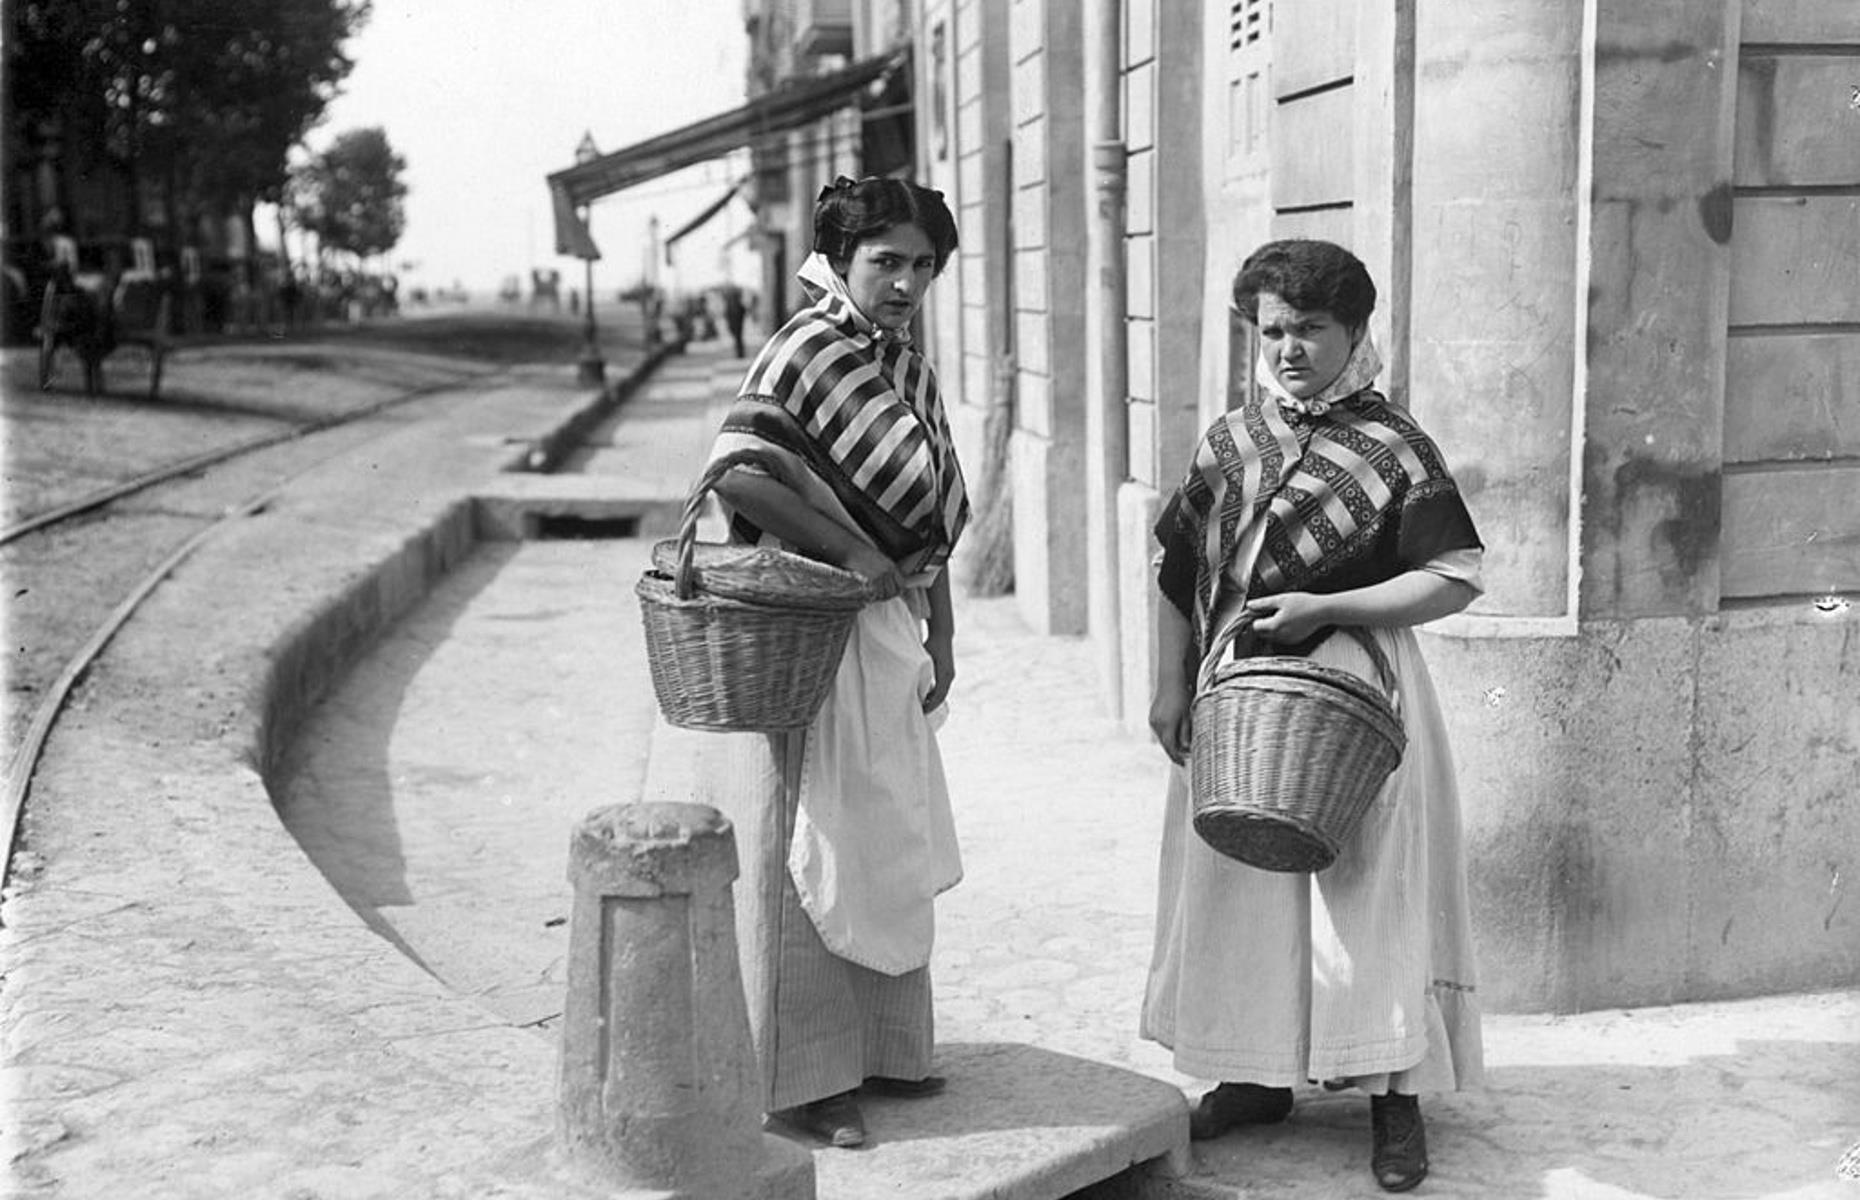 <p>Before the luxury hotels, swimming pools, fancy restaurants and beach umbrellas, Mallorca's unique culture was free to flourish – this 1930s photo shows women dressed in traditional costume with striped shawls and ‘rebozillo’ headdresses.</p>  <p><a href="https://www.loveexploring.com/news/71845/things-to-do-in-palma-mallorca"><strong>A Balearic stunner: what to see and do in Palma, Mallorca</strong></a></p>